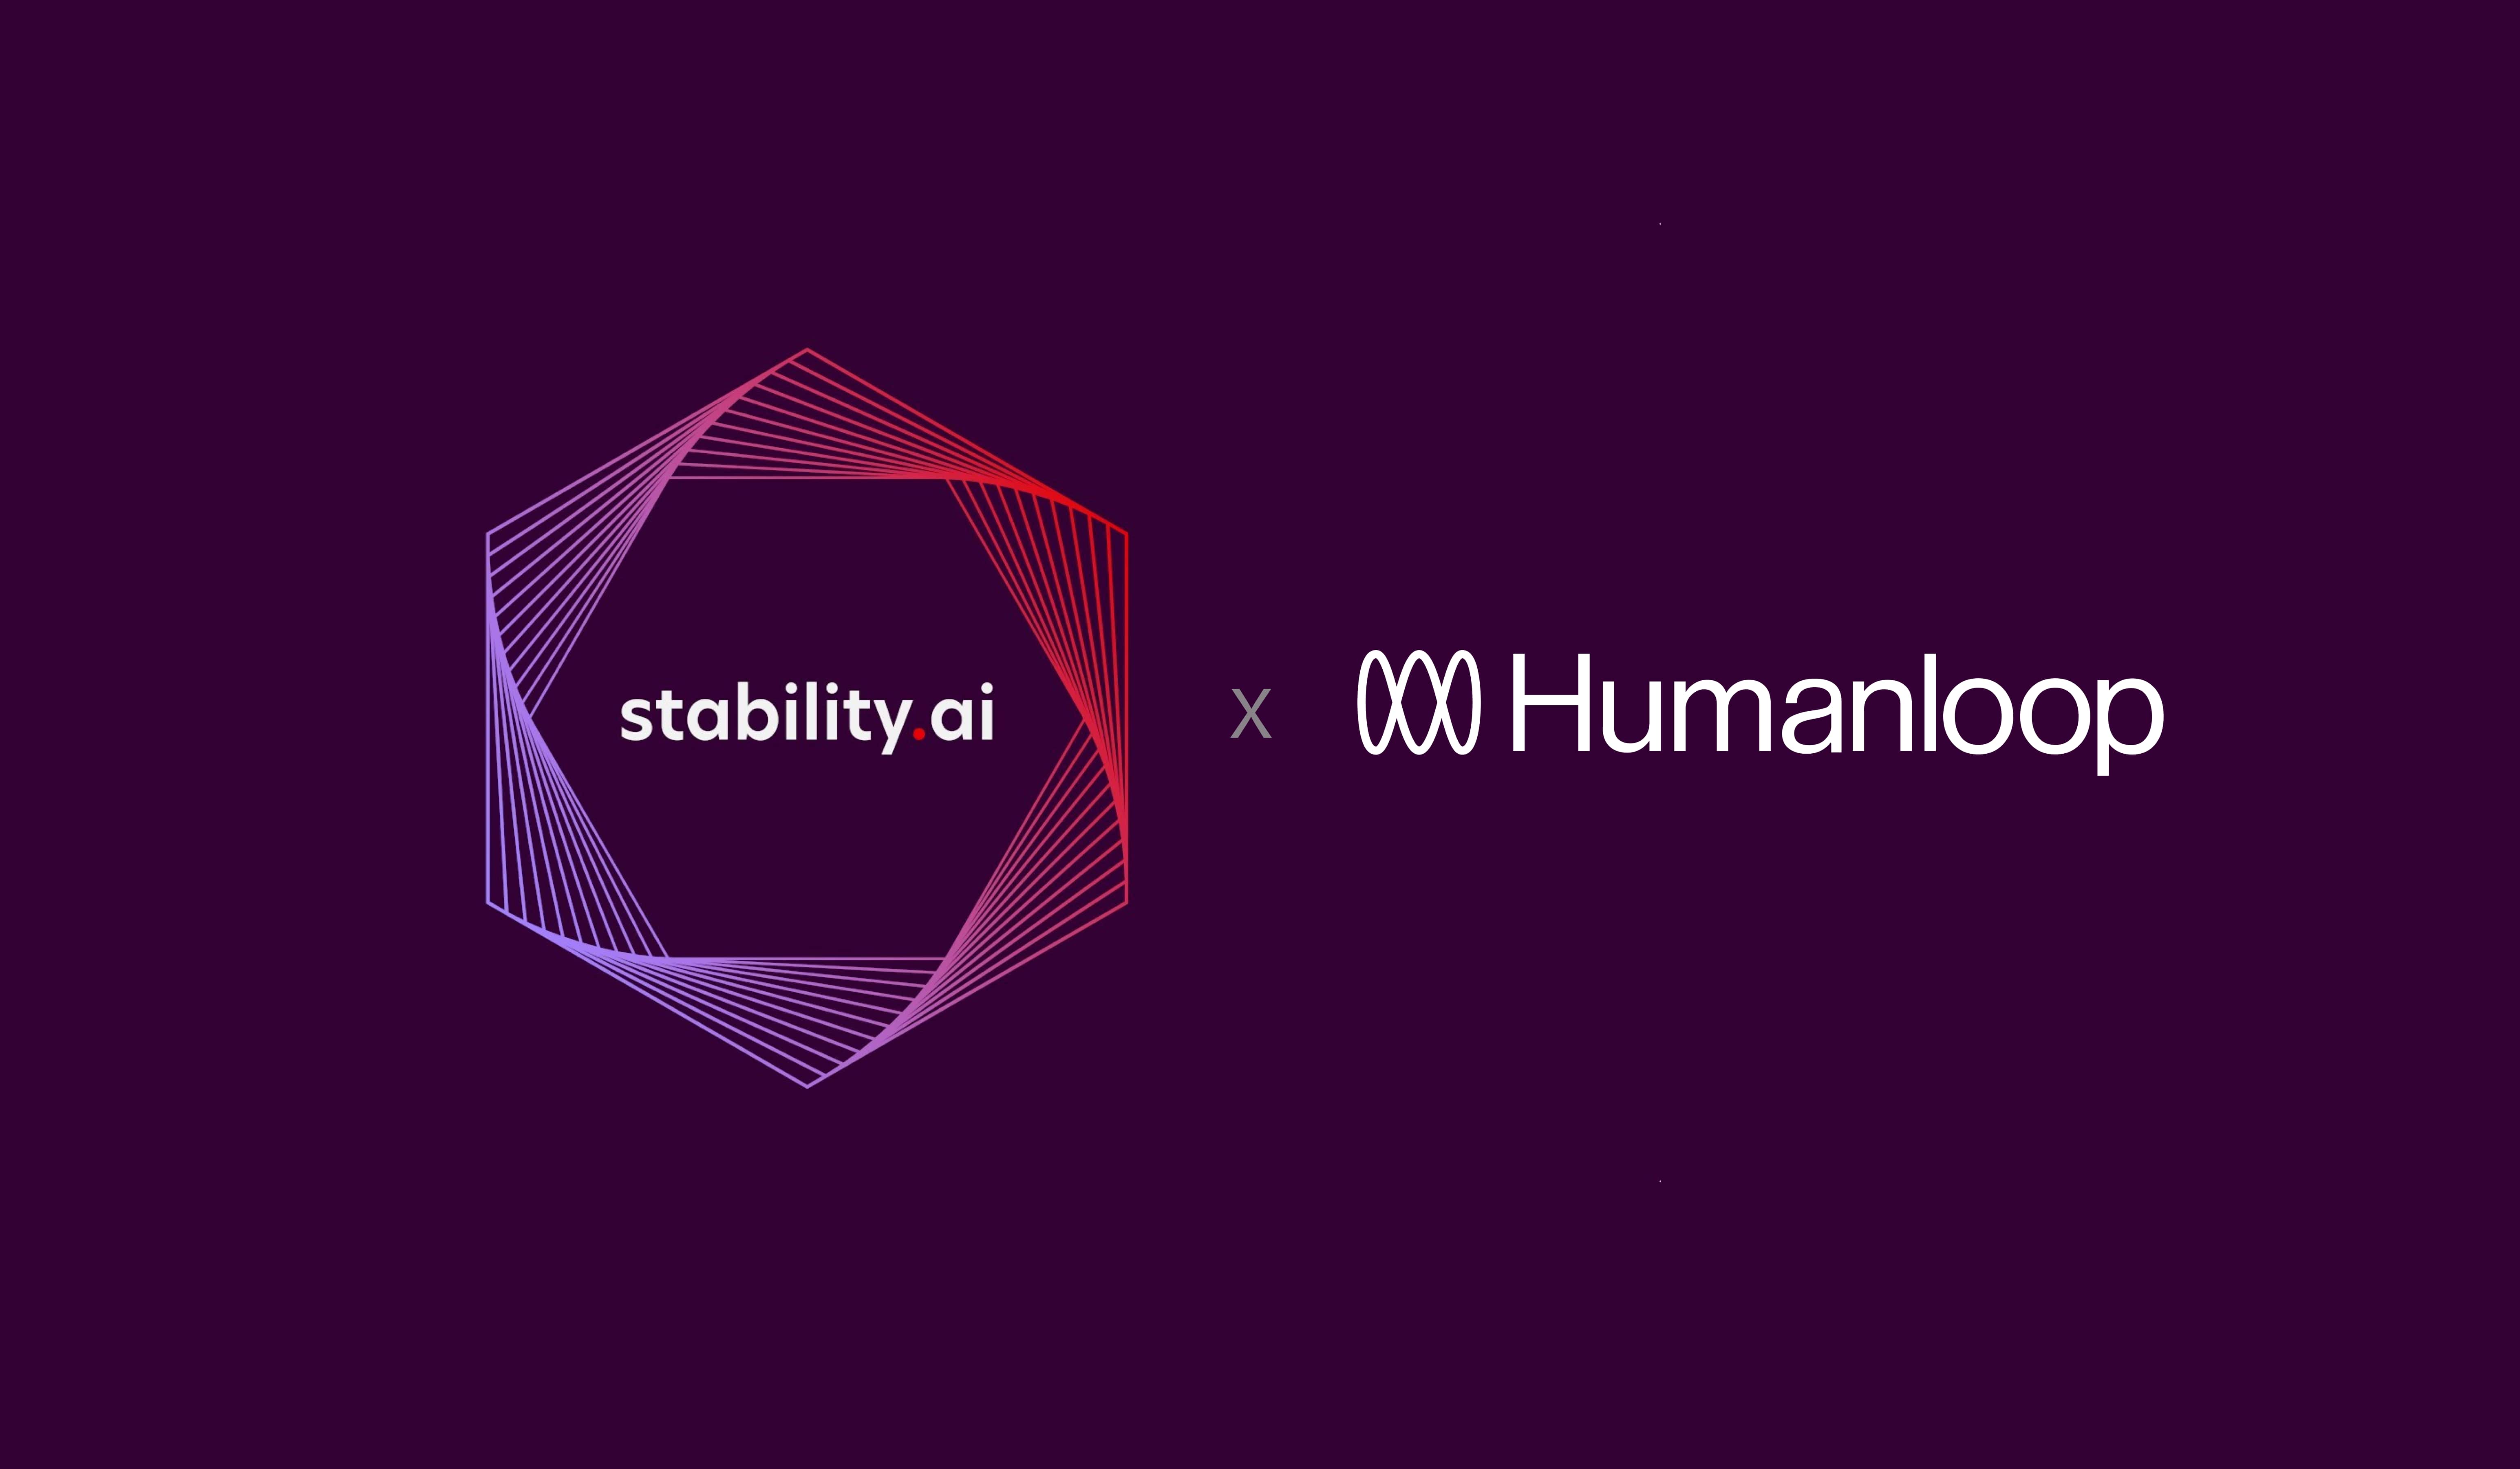 Humanloop partners with Stability AI to build the first open-source InstructGPT